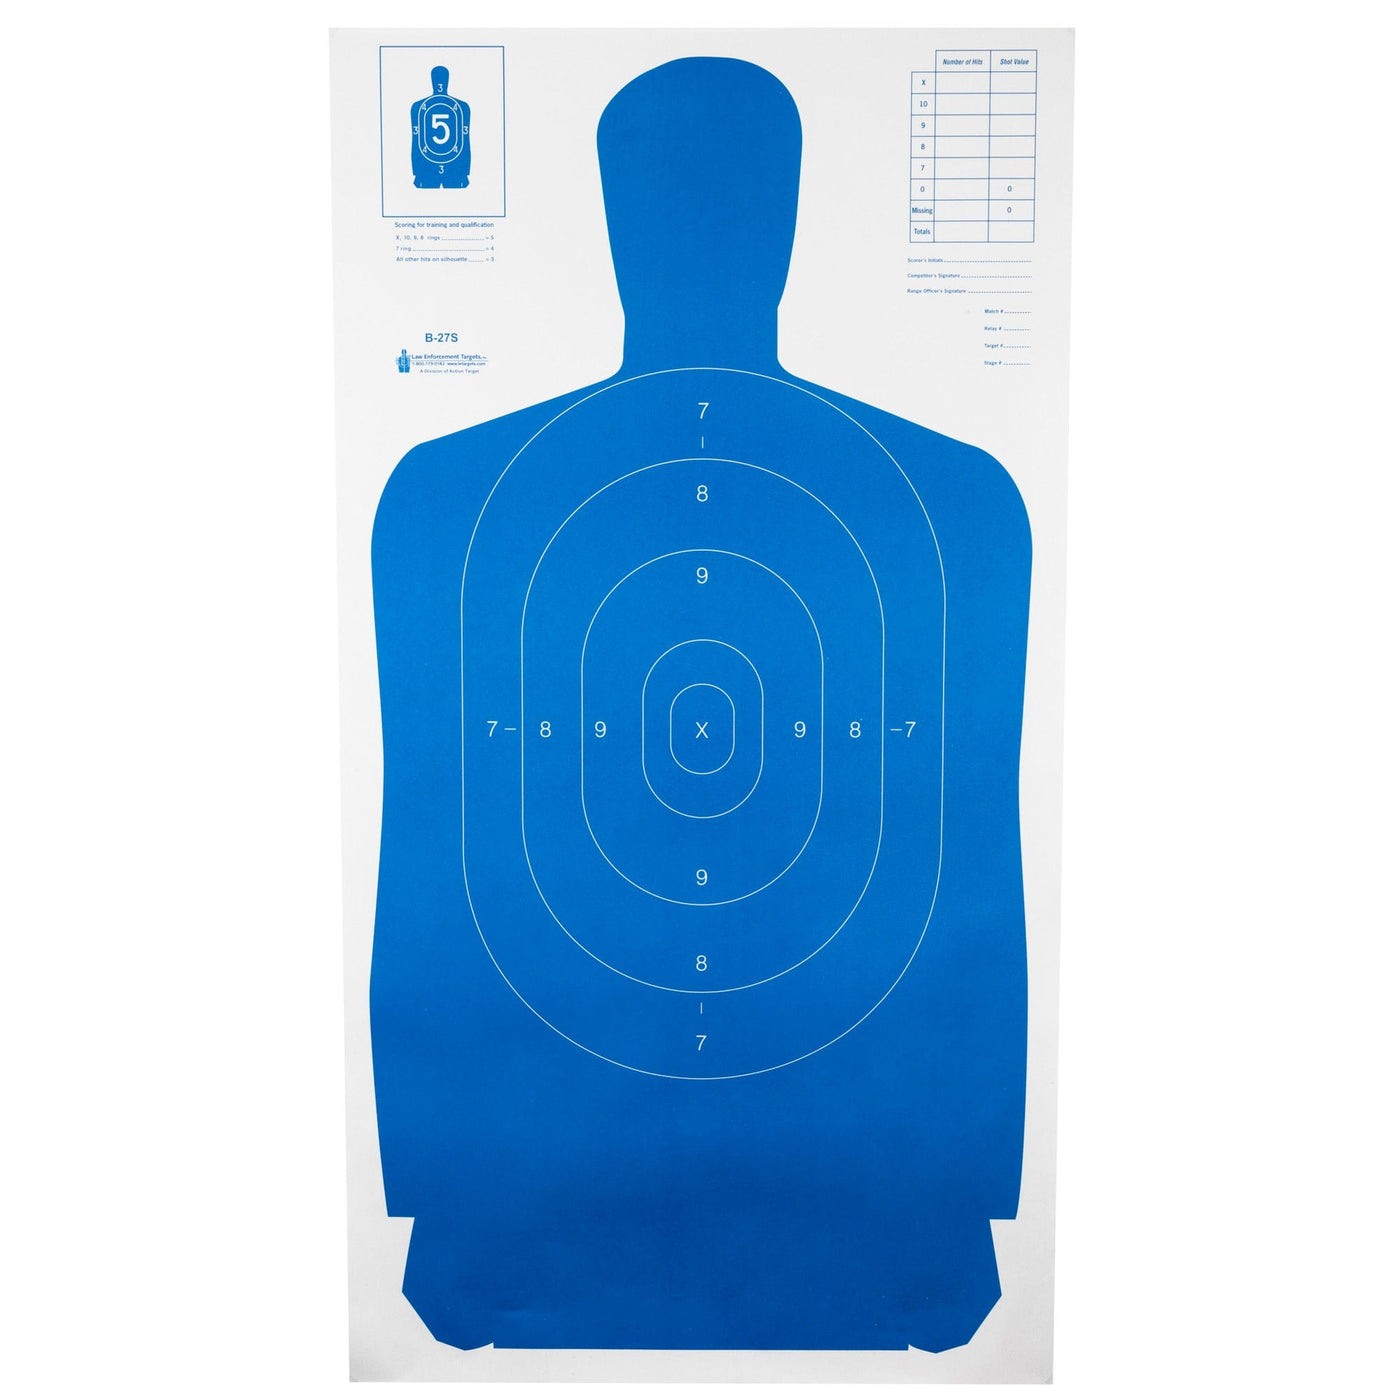 Action Target Action Tgt B27s 100pk Green Targets